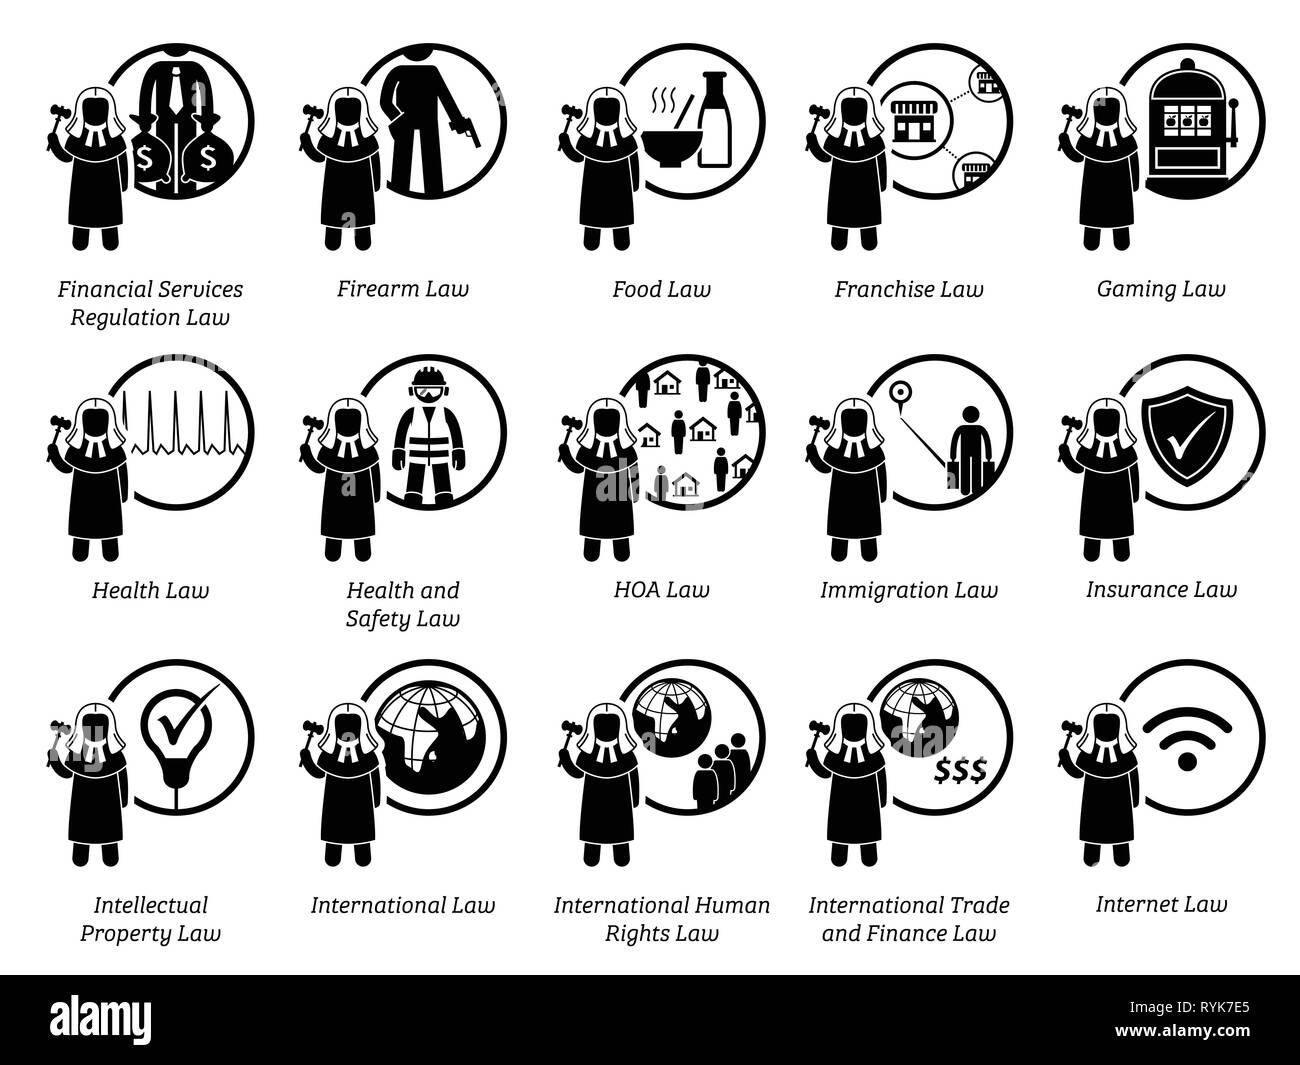 Different type of laws. Icons depict field and area of laws, justice, jurisdictions, regulations, and legal system. Part 4 of 7. Stock Vector